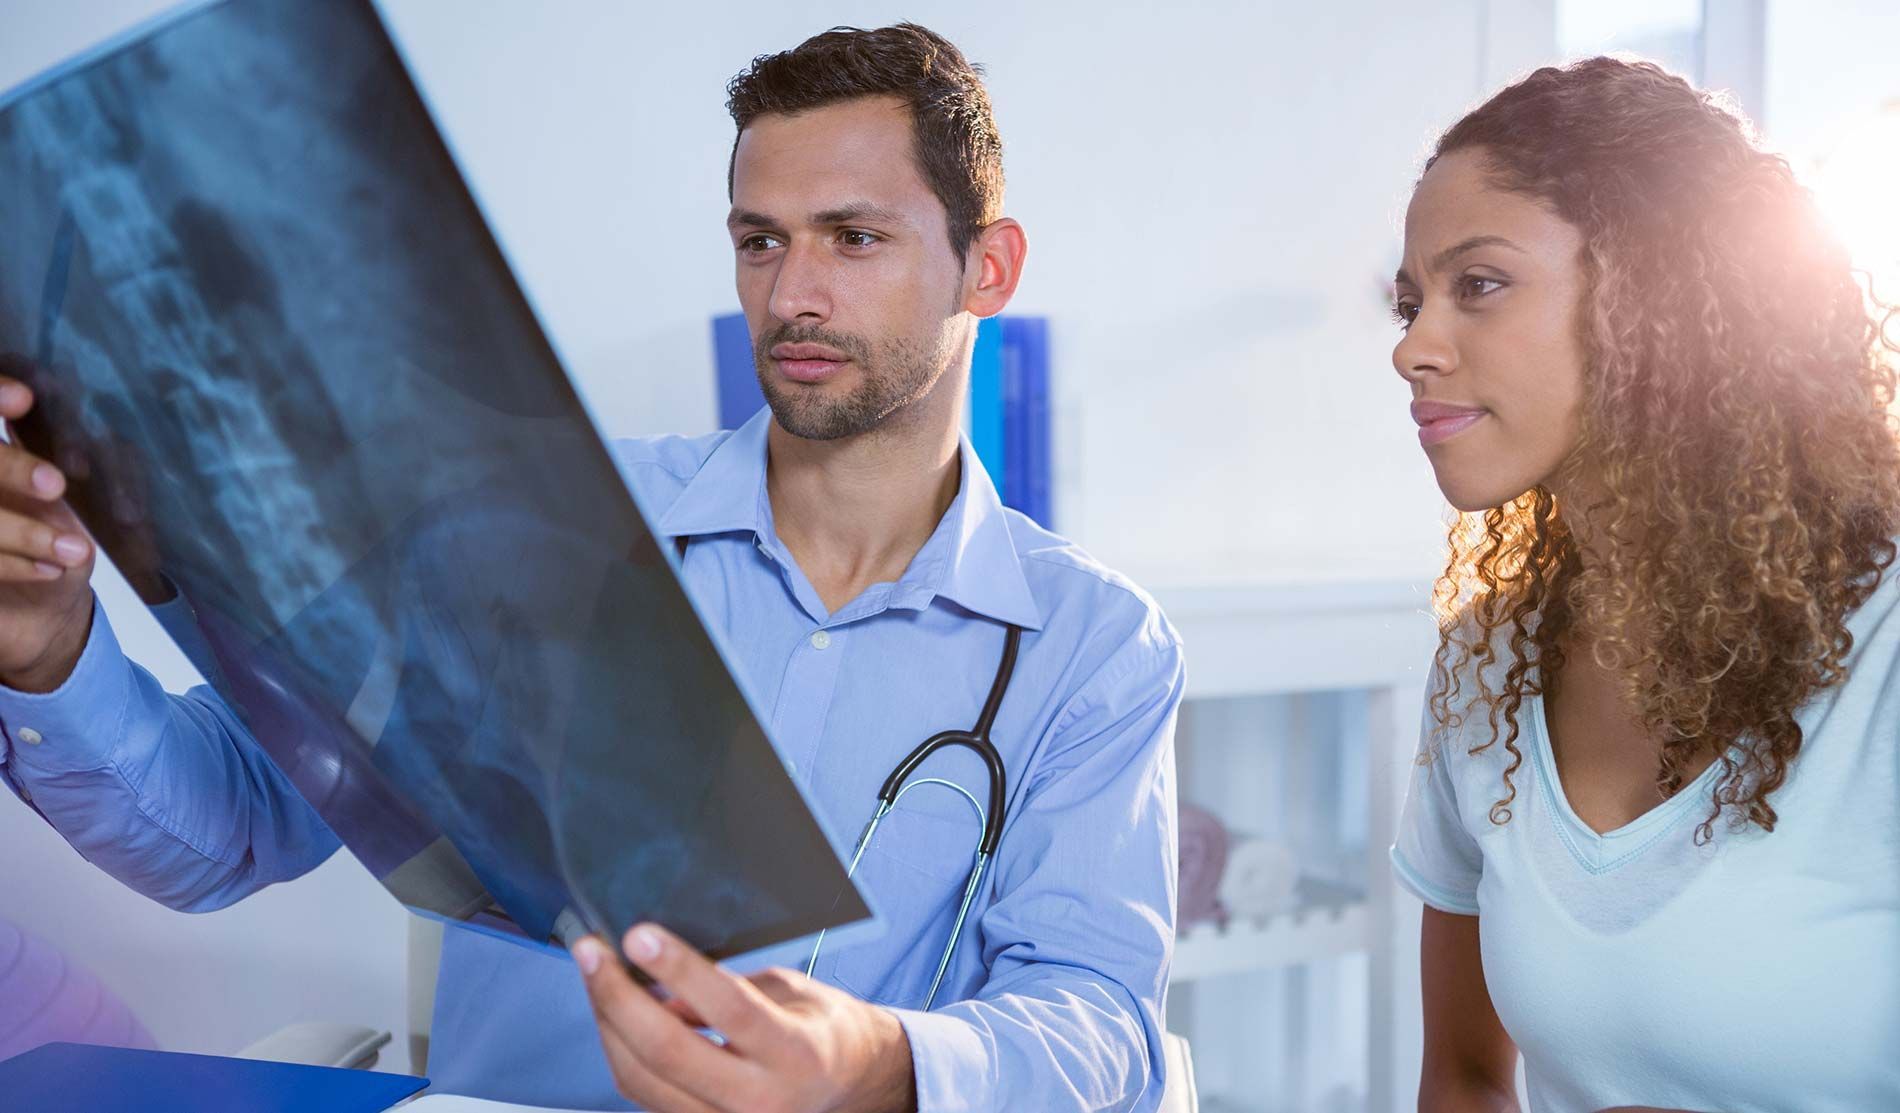 A doctor is looking at an x-ray with a patient.